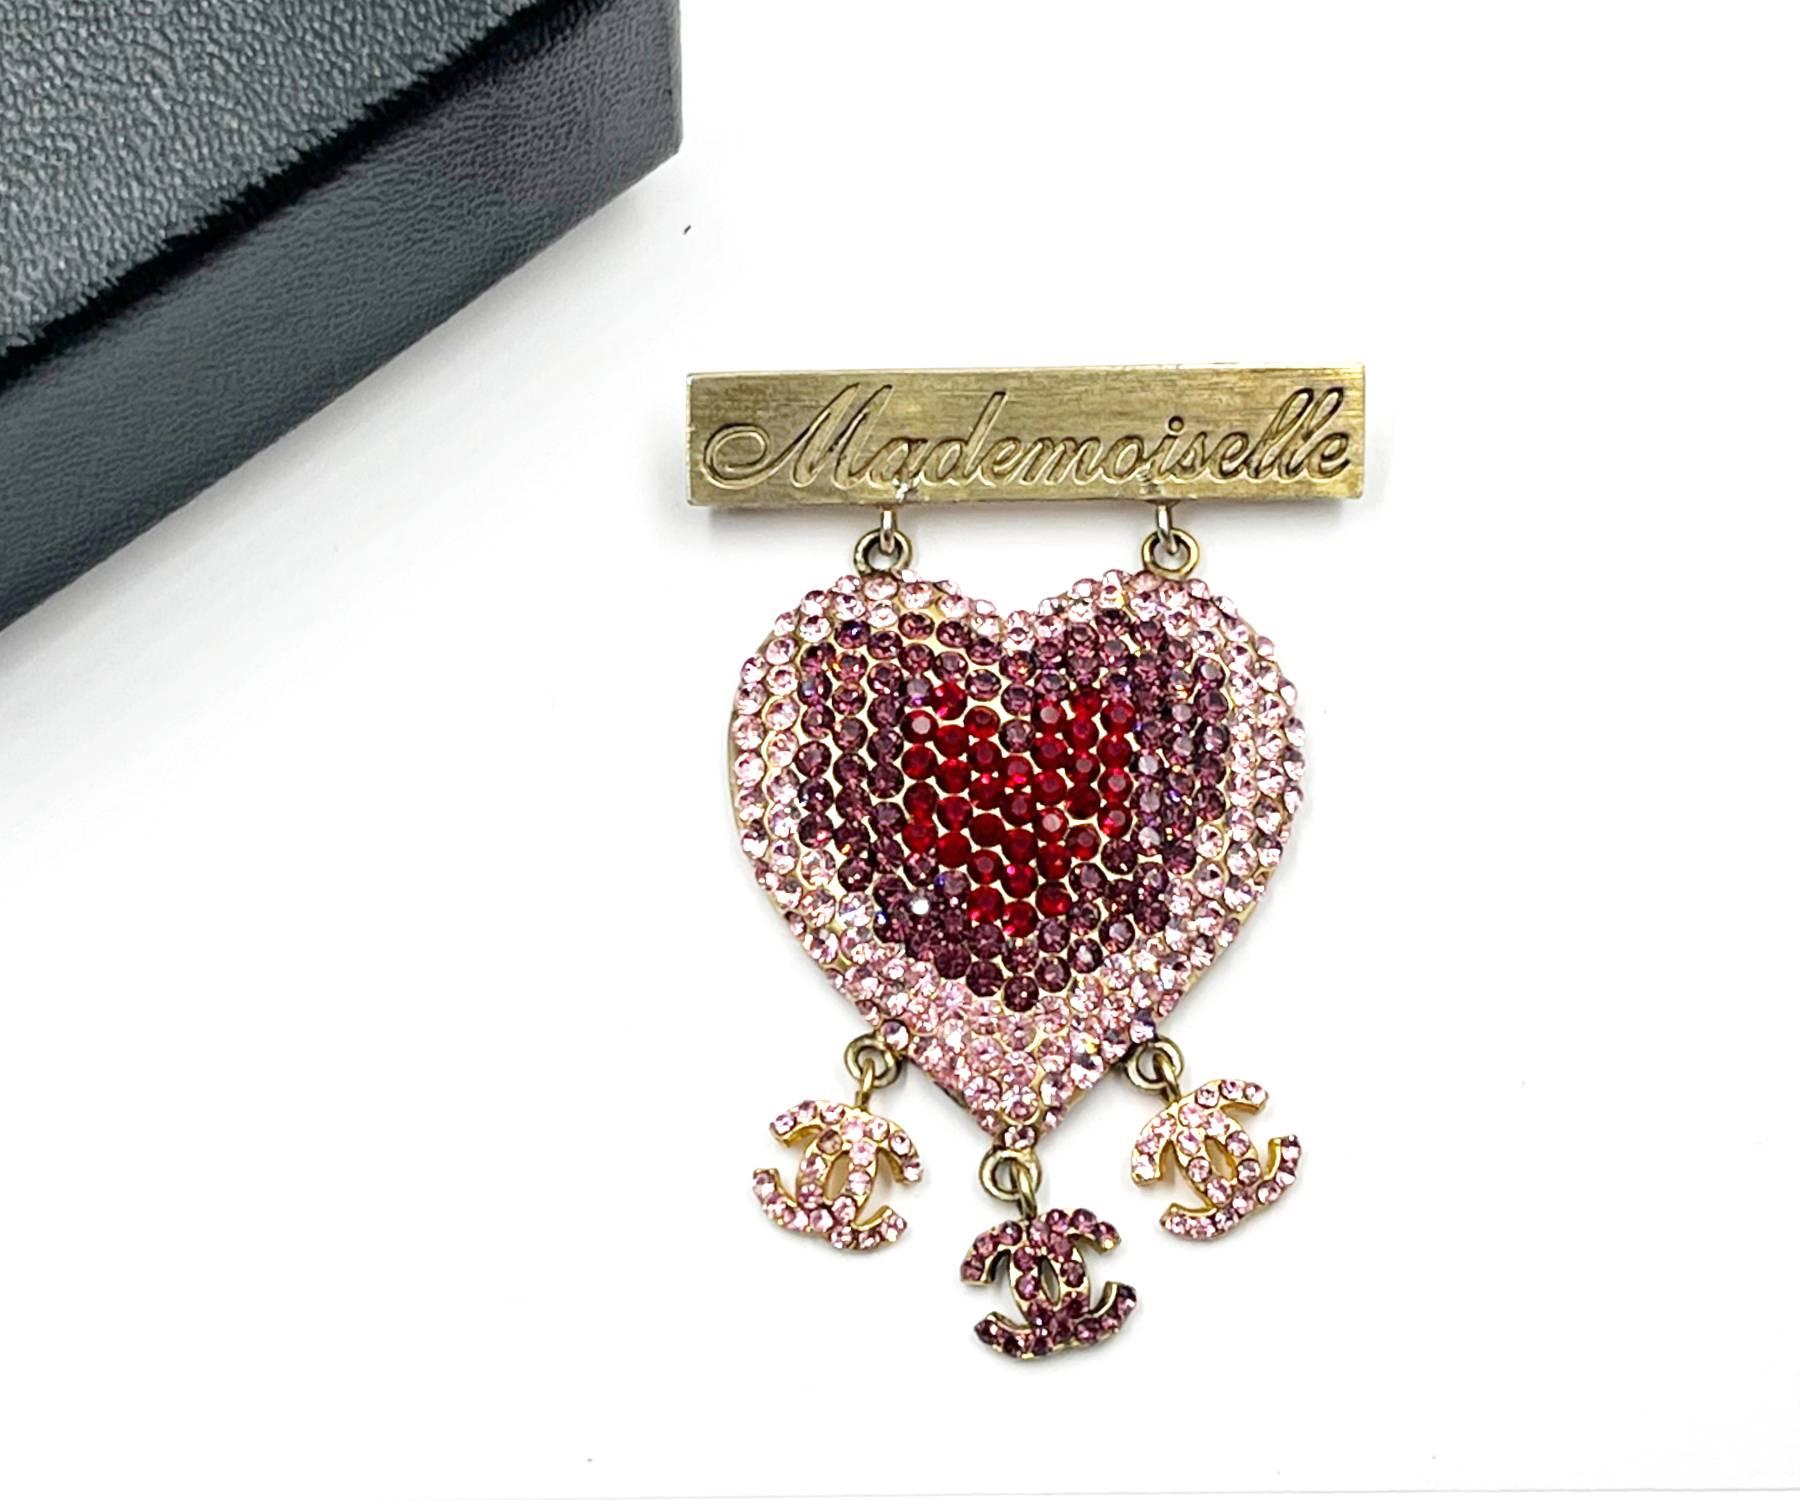 Chanel Vintage Rare Gold Plated Mademoiselle Pink Heart CC Brooch

*Marked 02
*Made in France
*Comes with the original box

-It is approximately 1.6